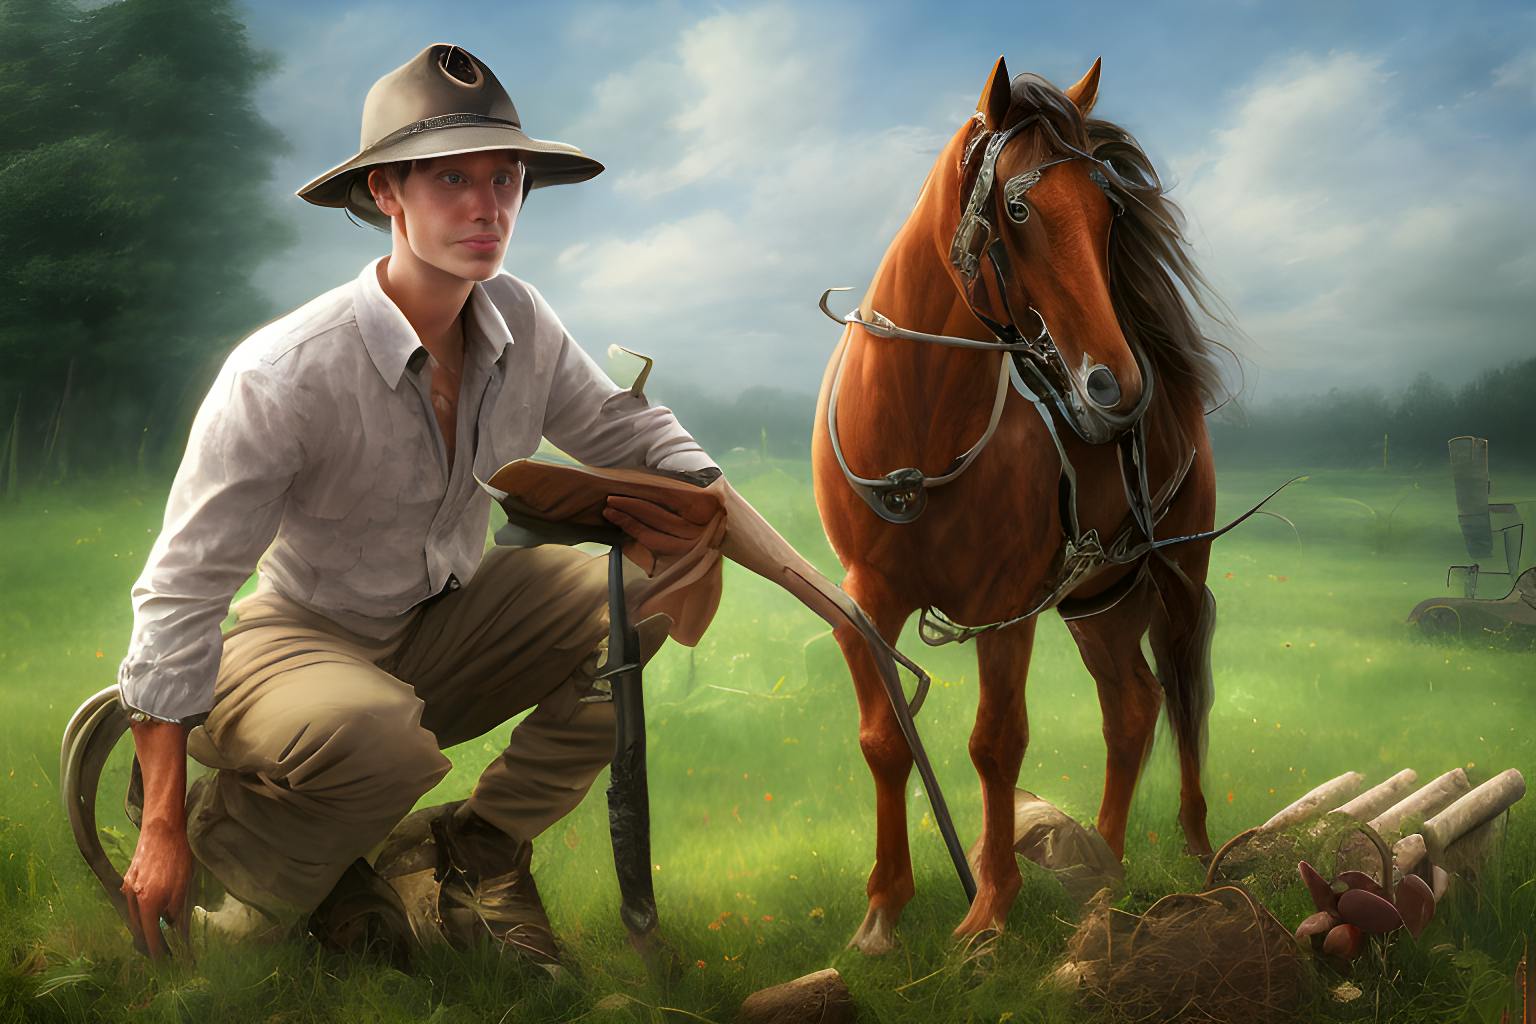 /the-parable-of-the-farmer-and-the-horse-a-short-story-that-will-make-you-rethink-everything feature image